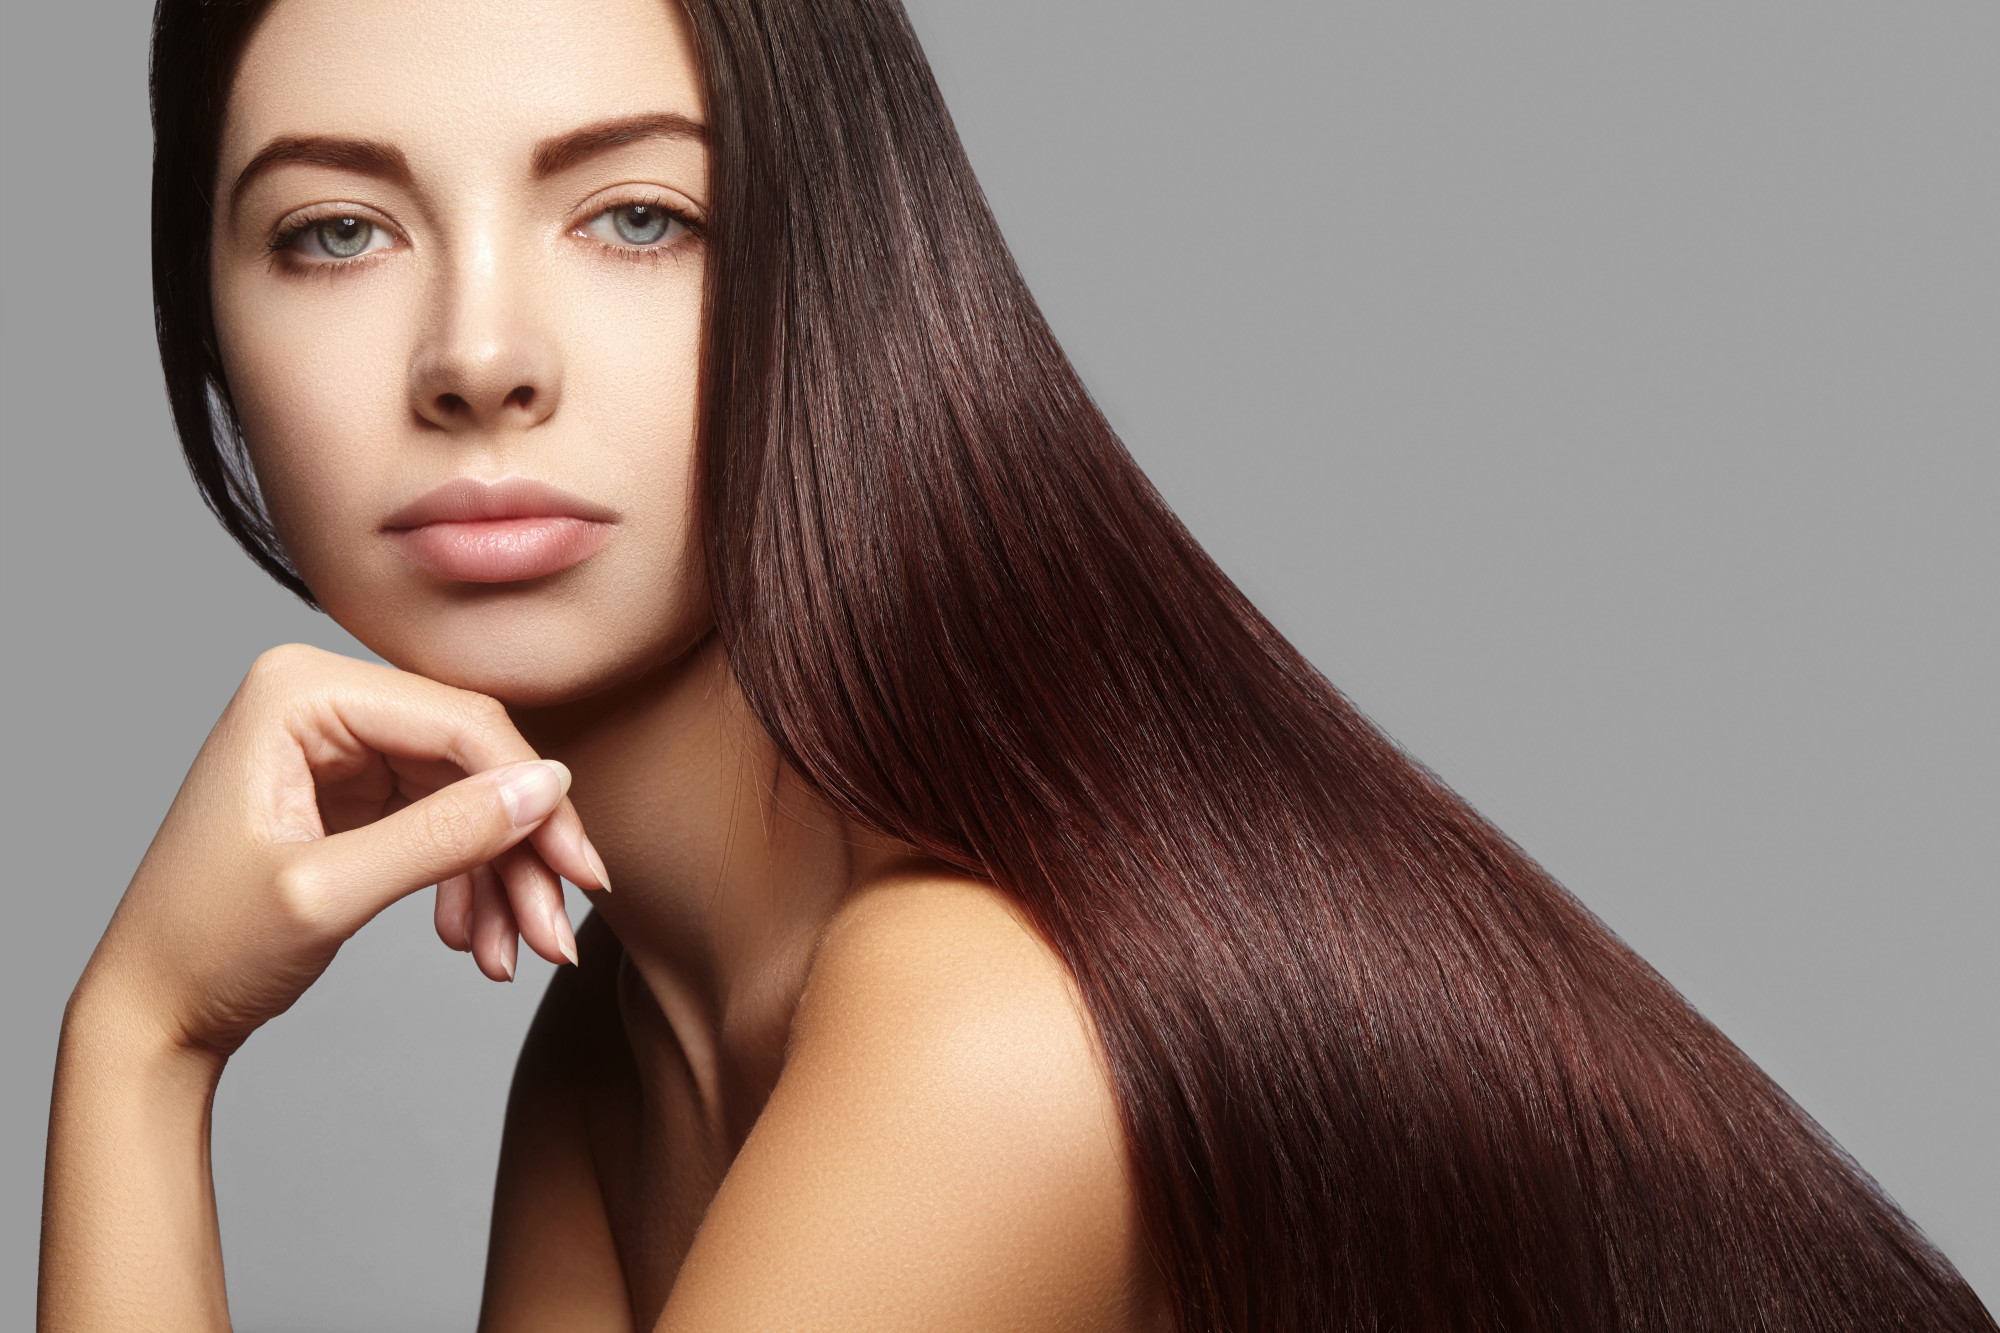 If you are searching for a new hair treatment, then you may want to consider a Brazilian Blowout. Here's everything you need to know about this treatment.